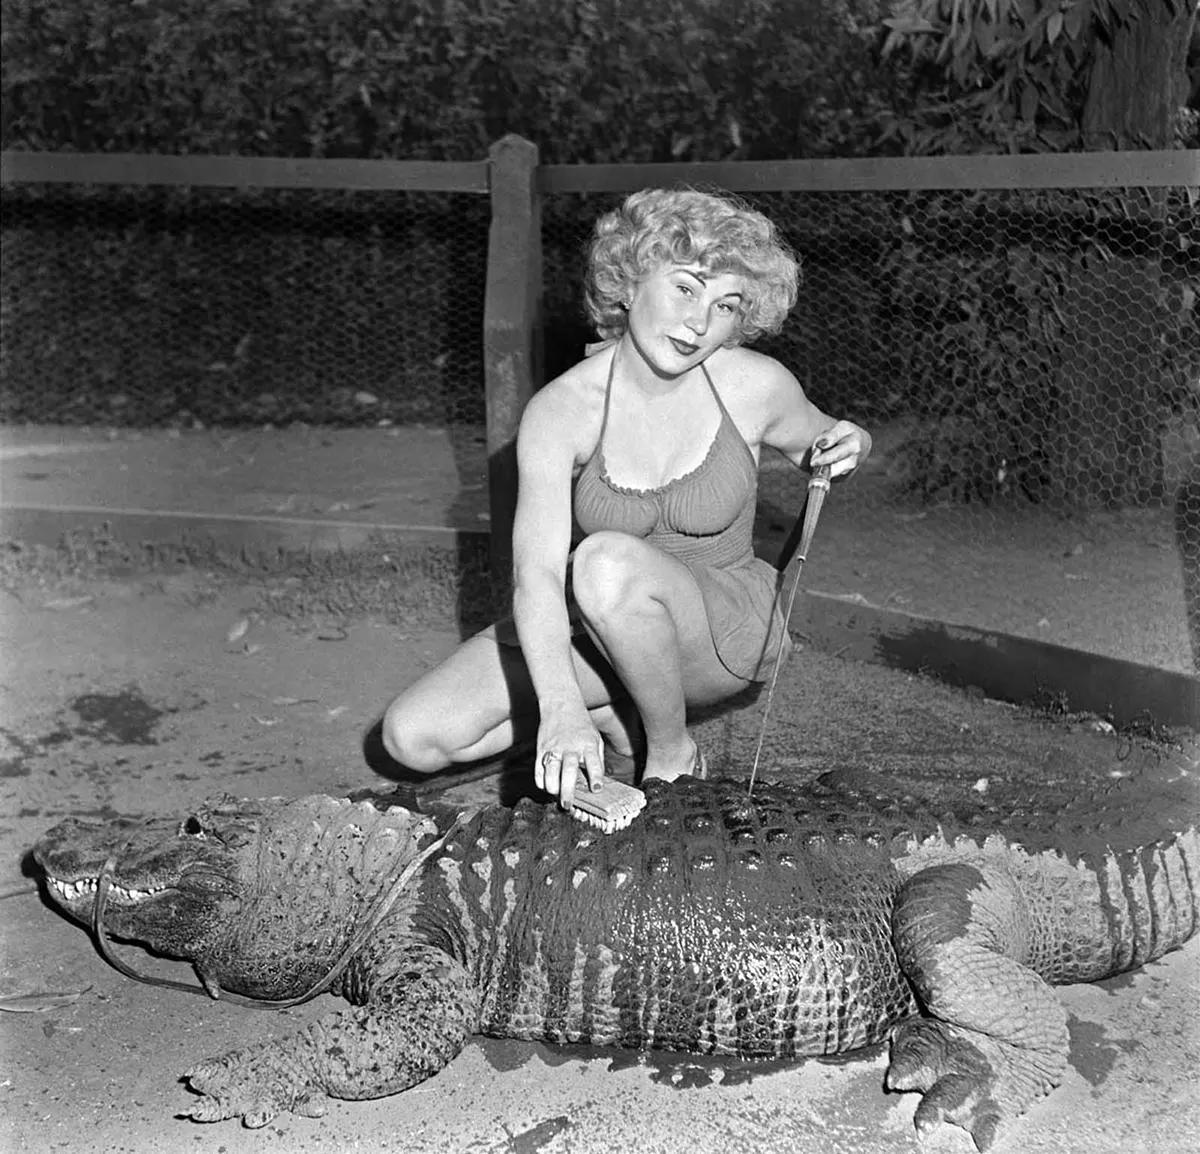 Inside California Alligator Farm where kids could ride and play with  alligators, 1920s - Rare Historical Photos